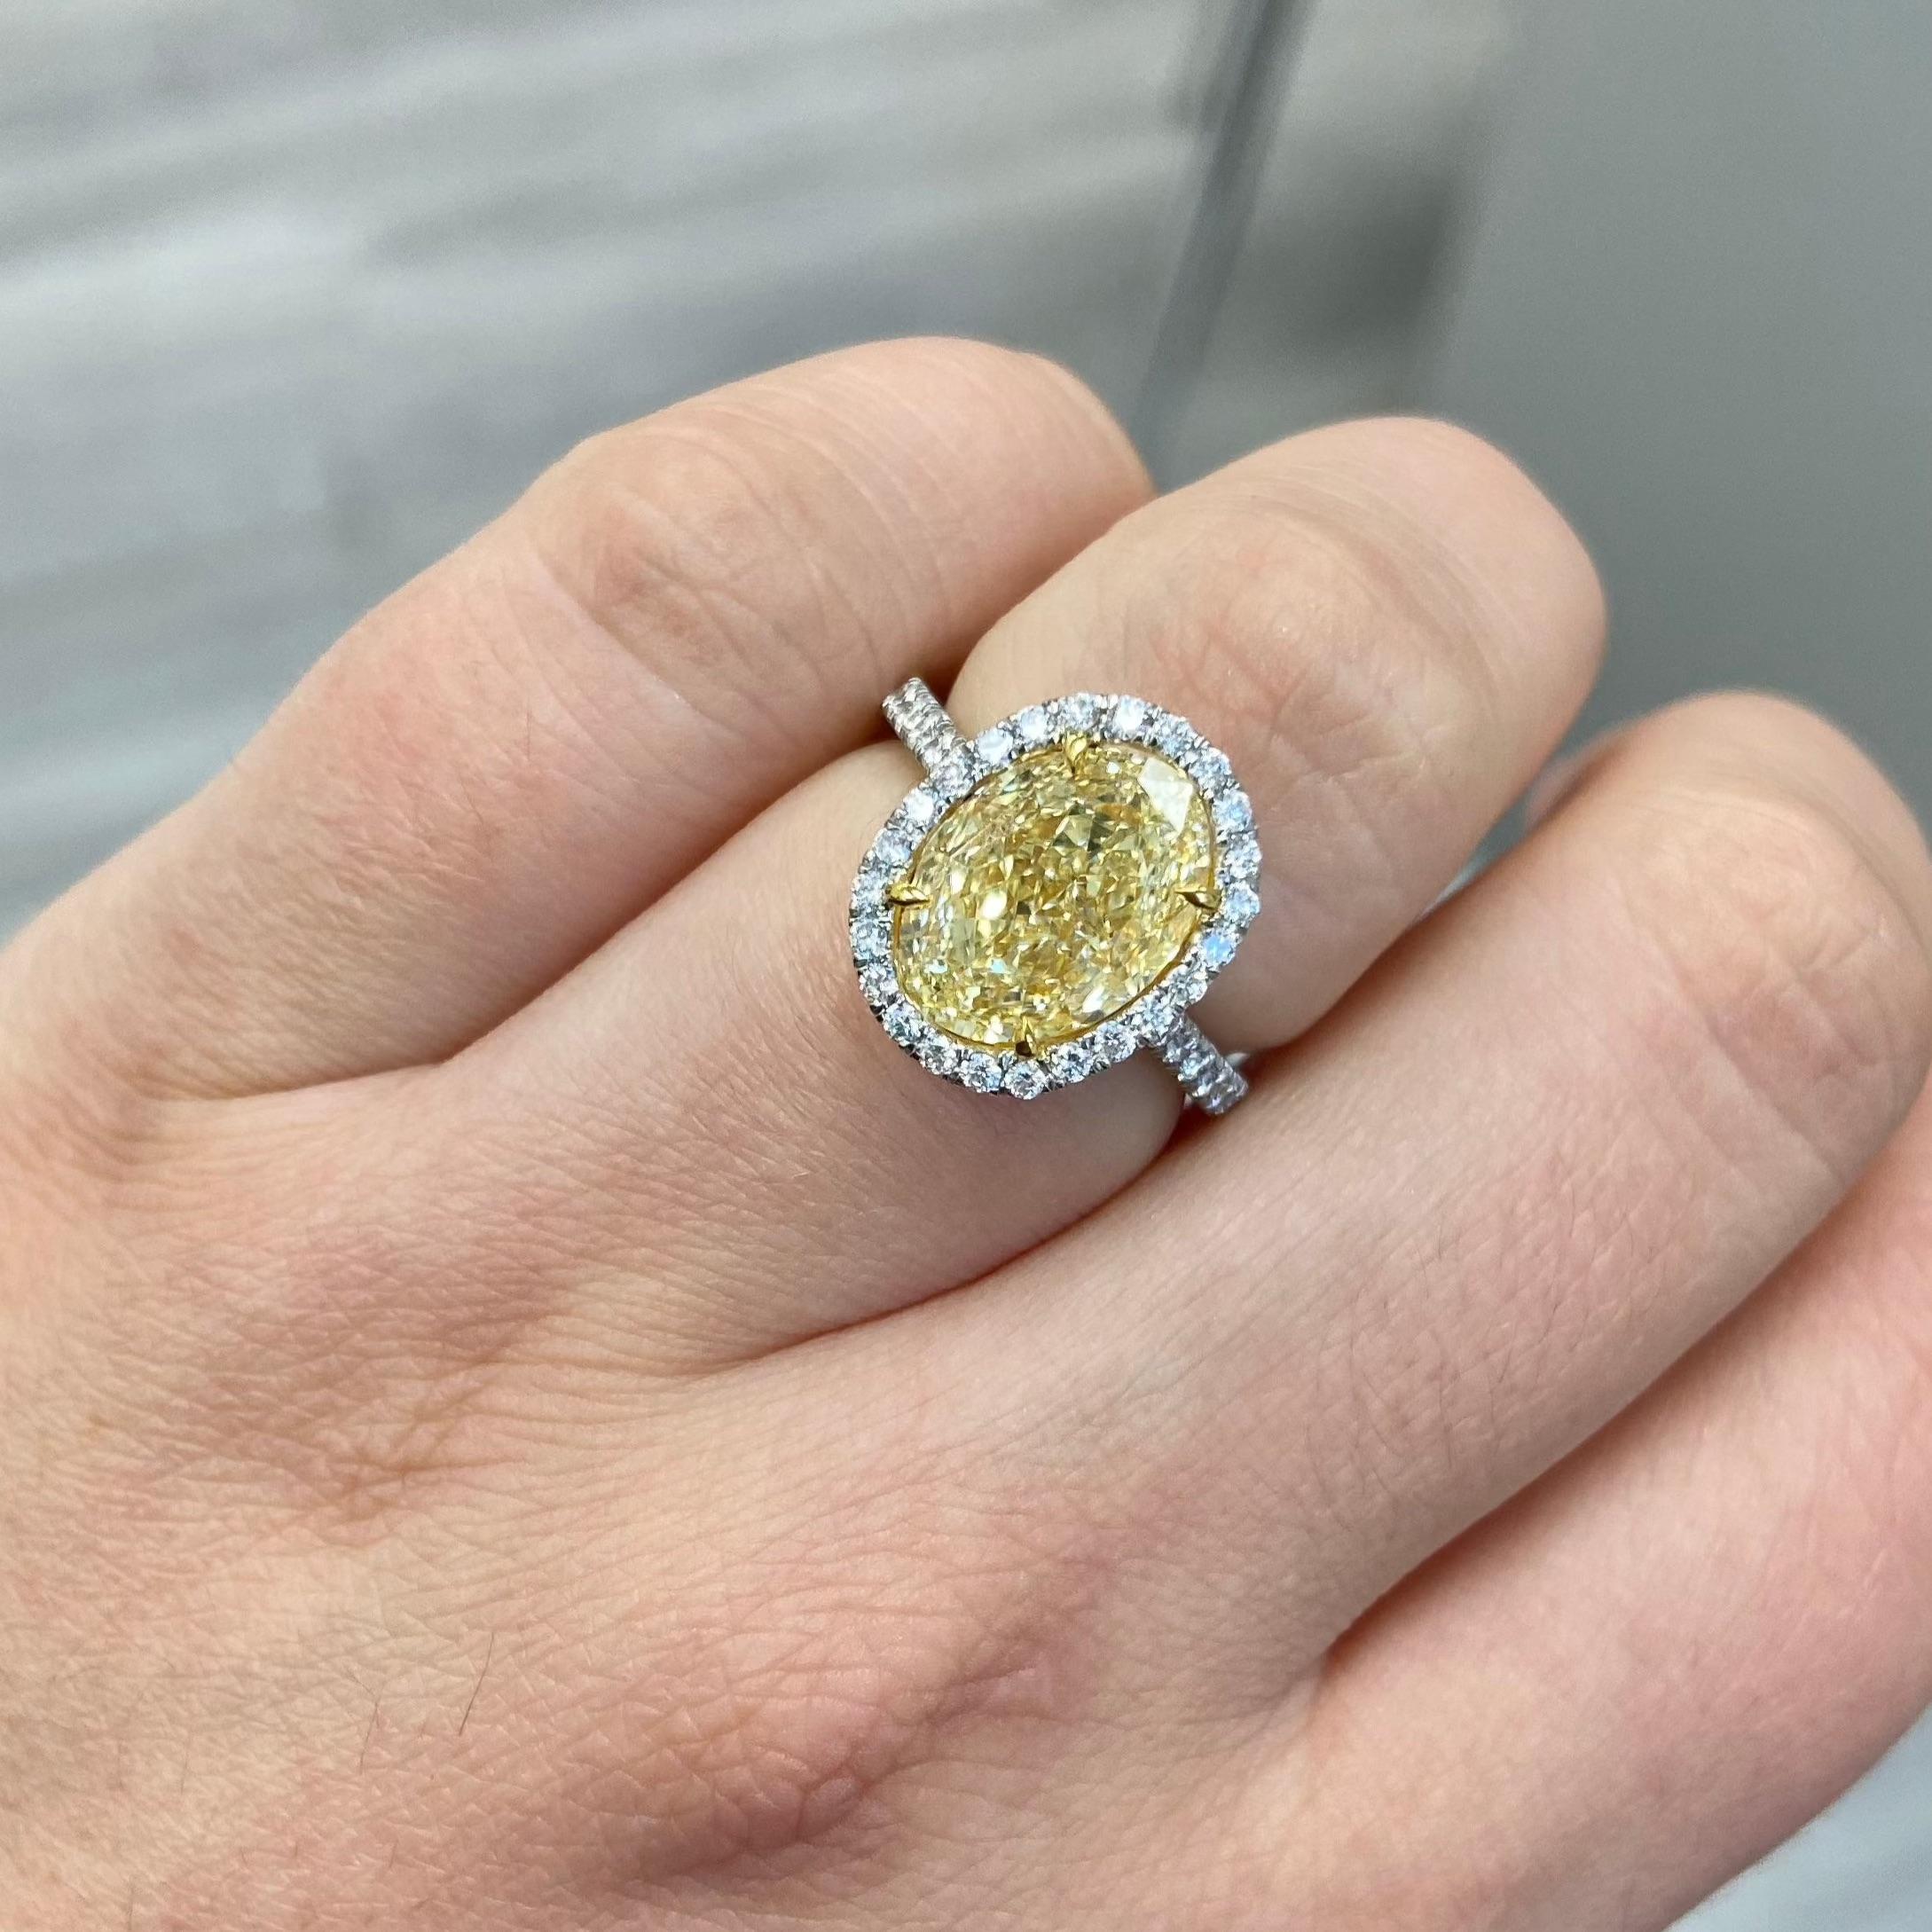 Exceptionally well cut oval with no bow tie and full of fire. Set in a Platinum ring with a Yellow Gold basket making it face up as a Fancy Yellow!

5.03 Carat Light Yellow (WX) Oval 
VS1 Clarity 
0.68 Carats of Surrounding Diamonds
Set in Platinum